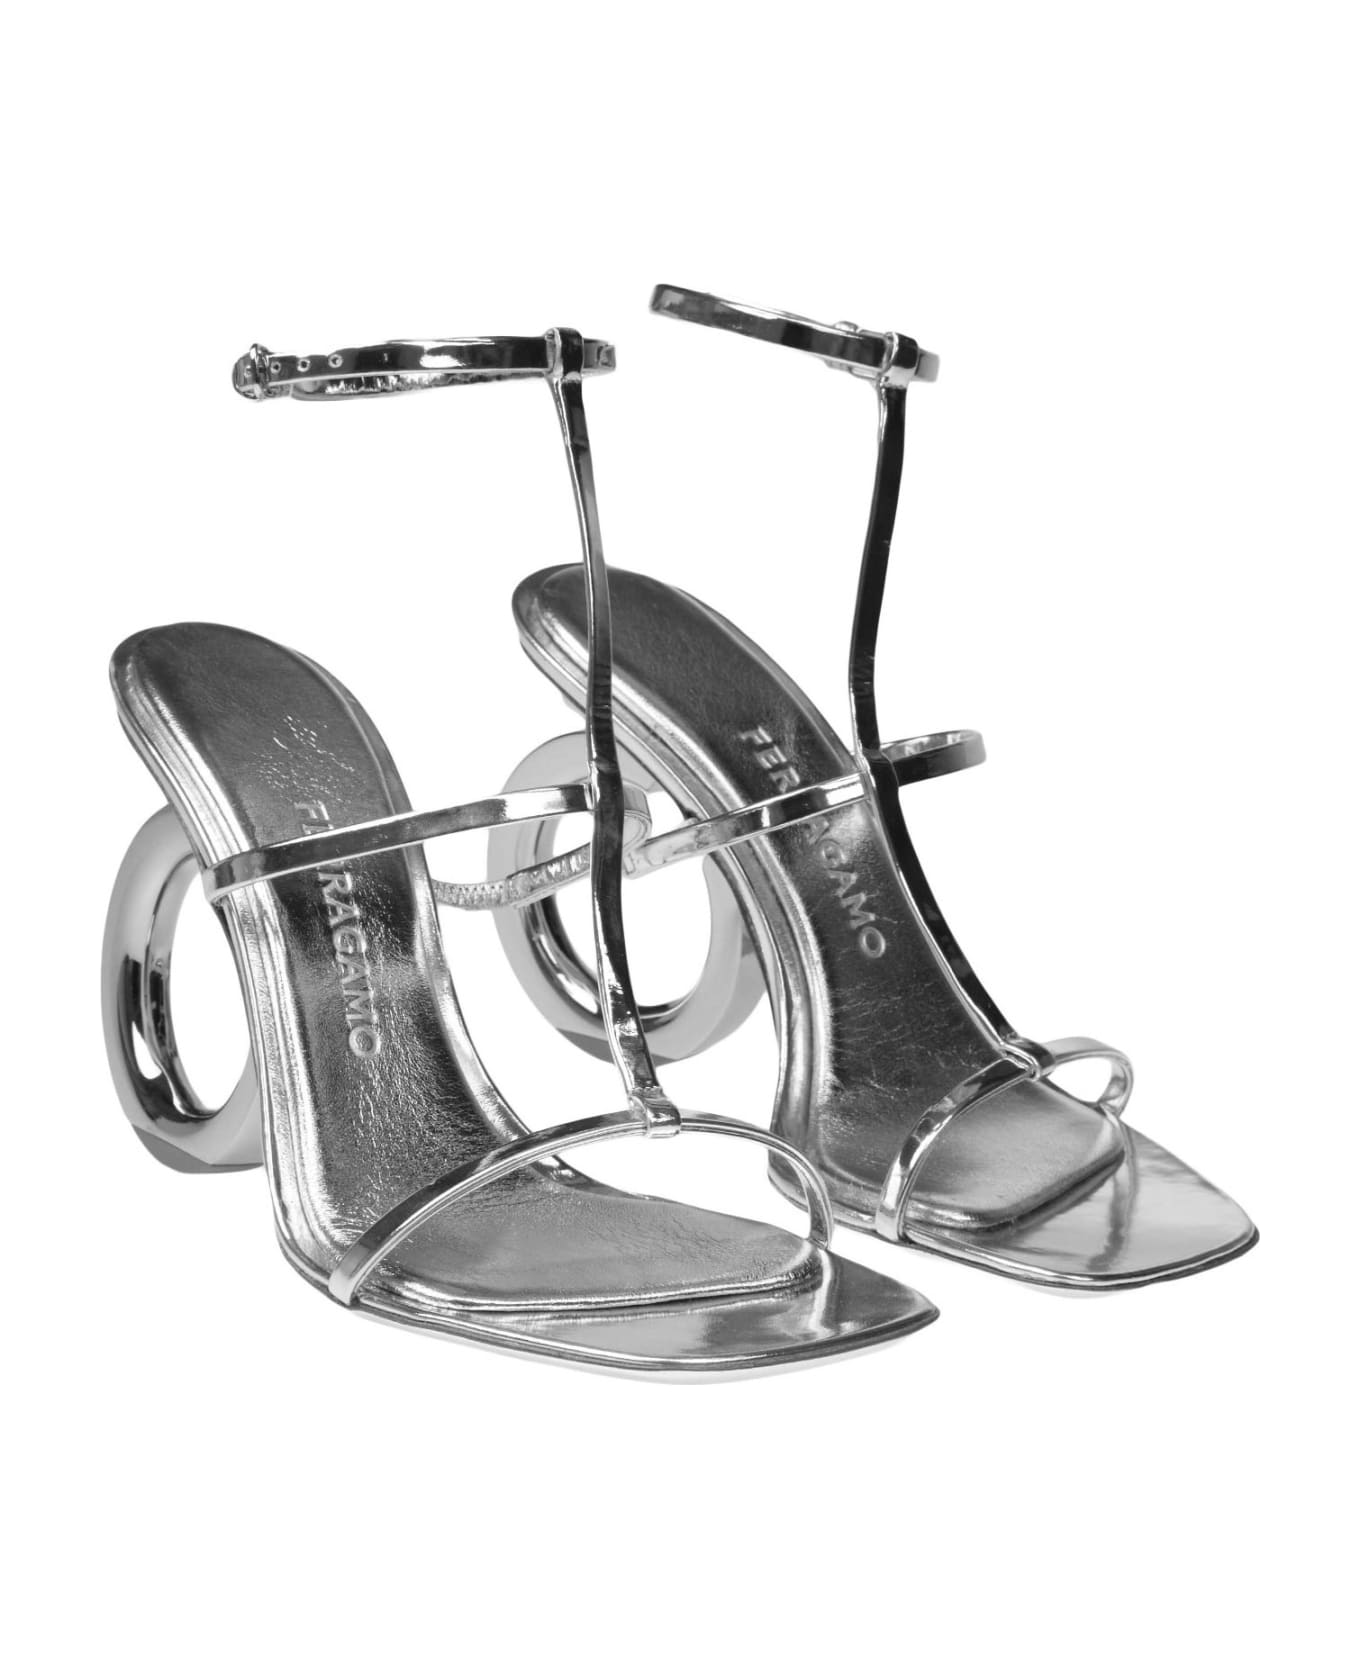 Ferragamo Elina Sandal In Painted Leather With Gancini Heel - Silver